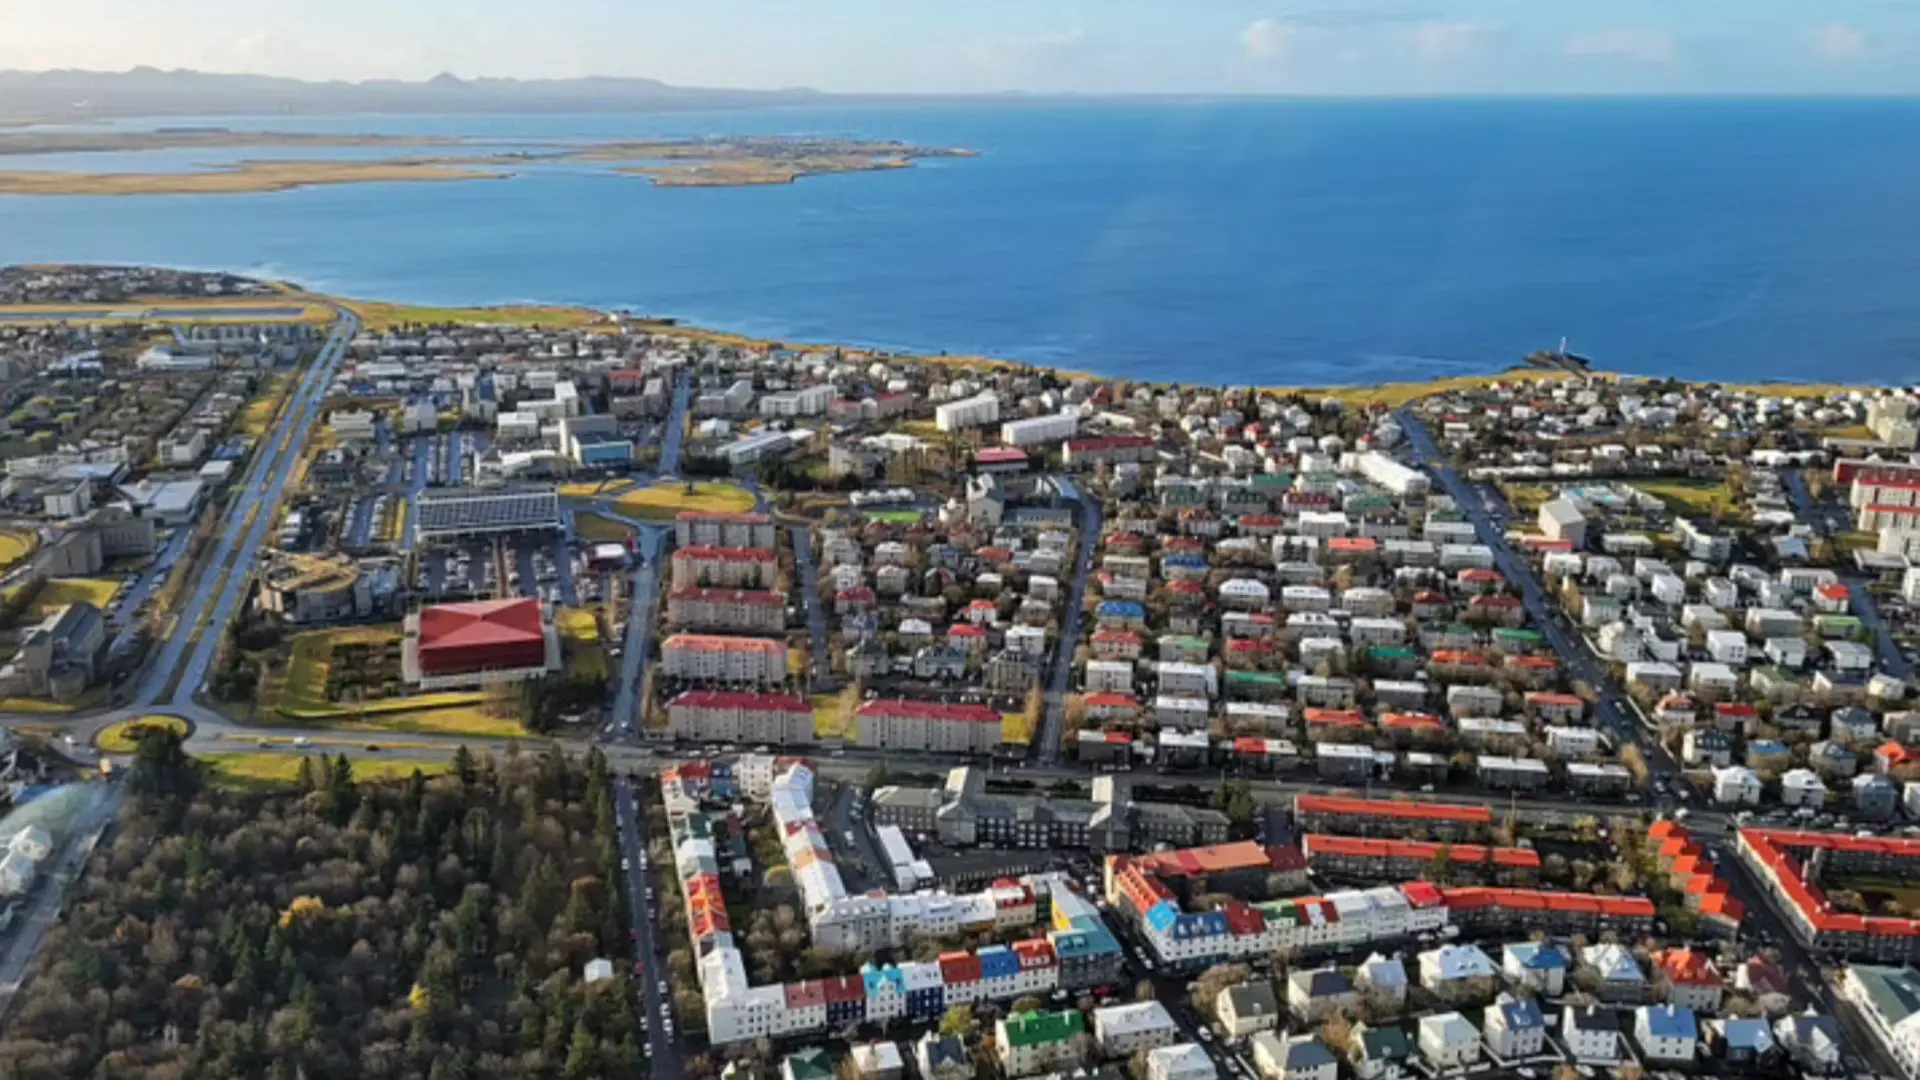 A view of the city from the helicopter during the tour in Iceland